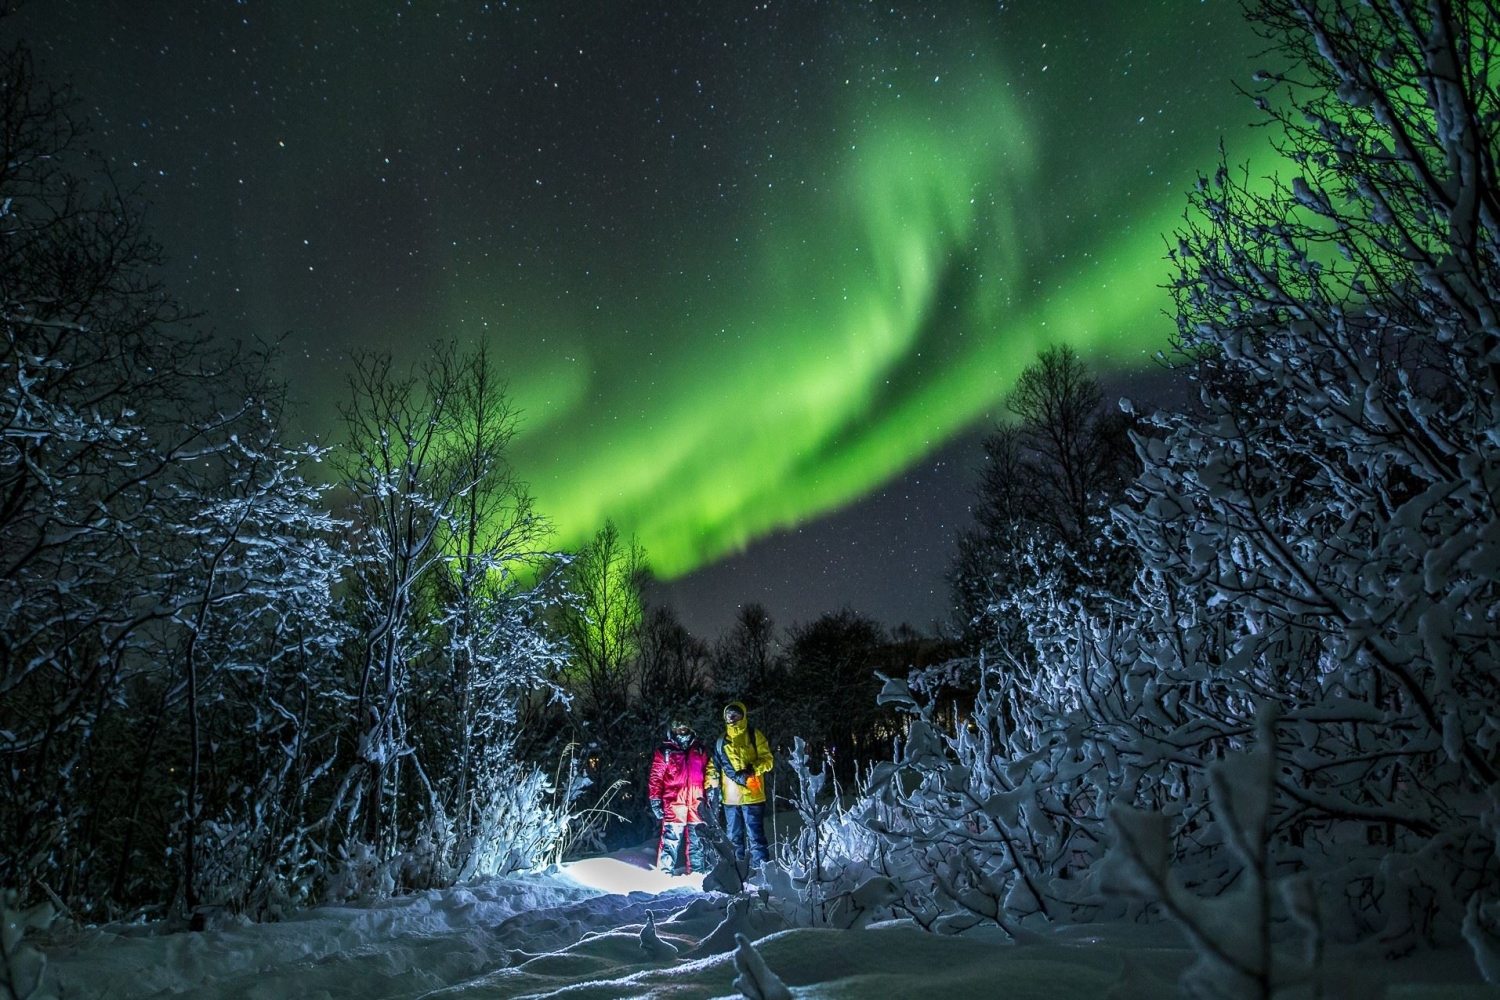 Northern lights tour by minibus